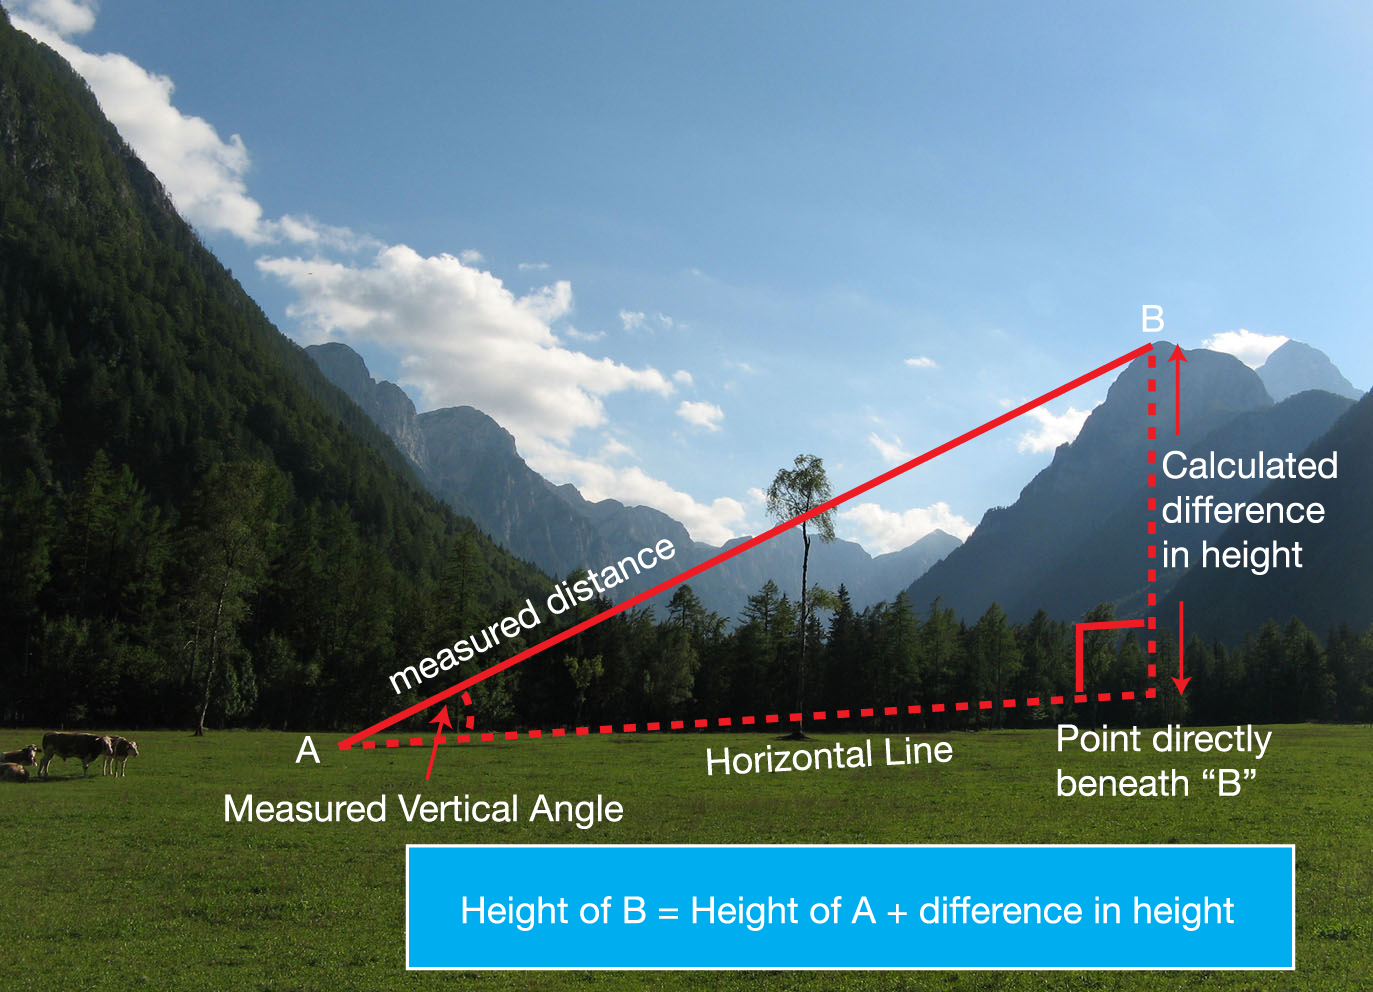 Image of mountains with a diagram overlaid explaining how to measure difference in height by vertical angles